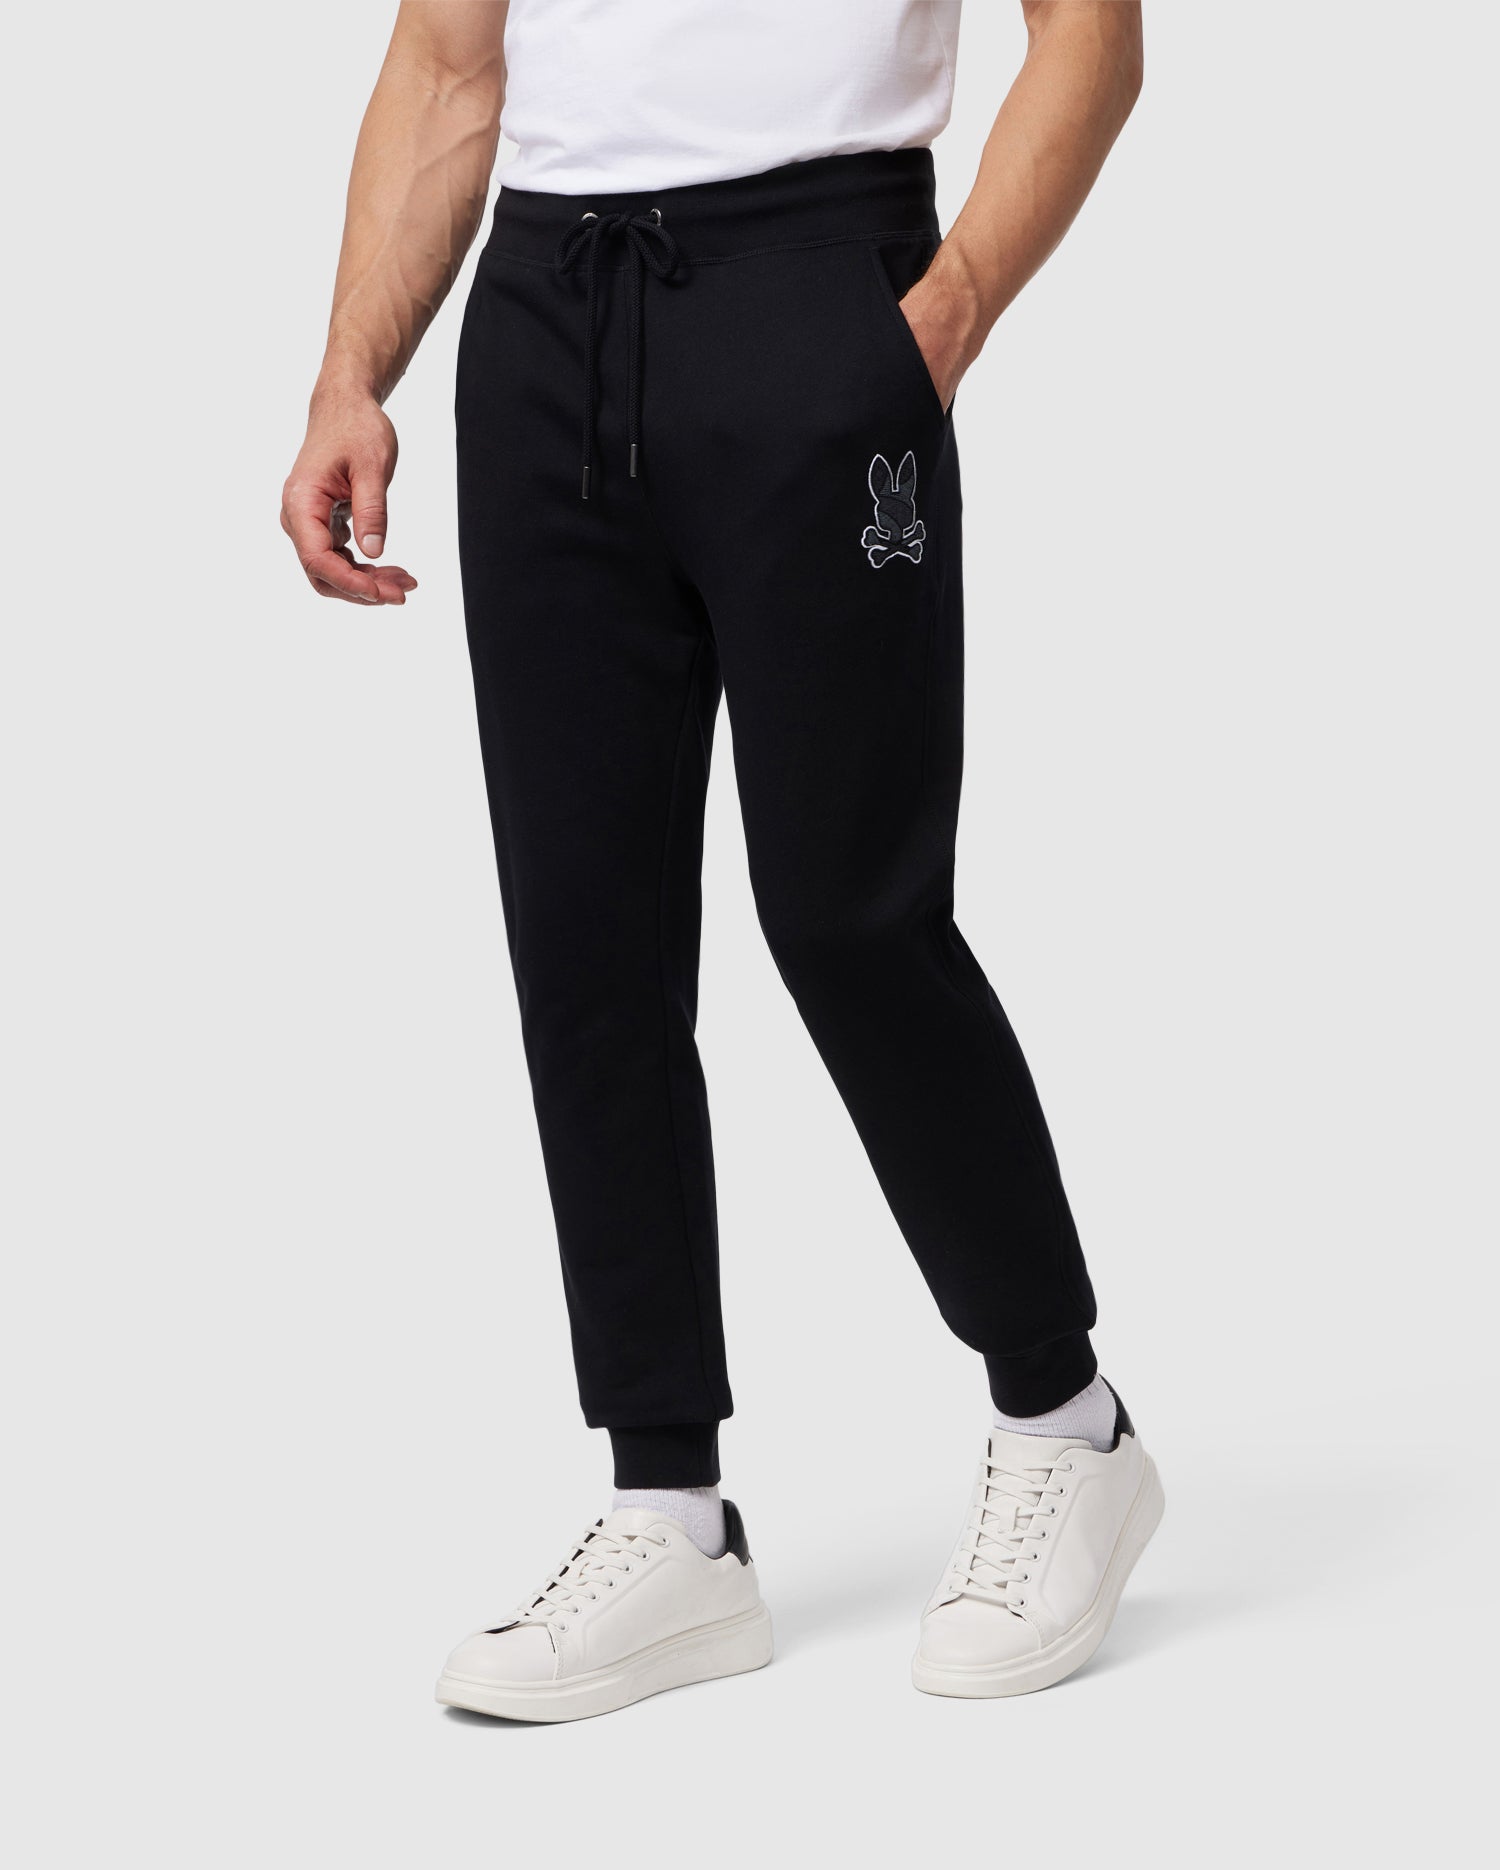 A person dressed in black Psycho Bunny MENS LENOX REGULAR FIT SWEATPANT - B6P105B200 with a chainstitch-embroidered bunny logo on the left thigh and a white t-shirt. They are also wearing white sneakers. The background is plain and neutral.